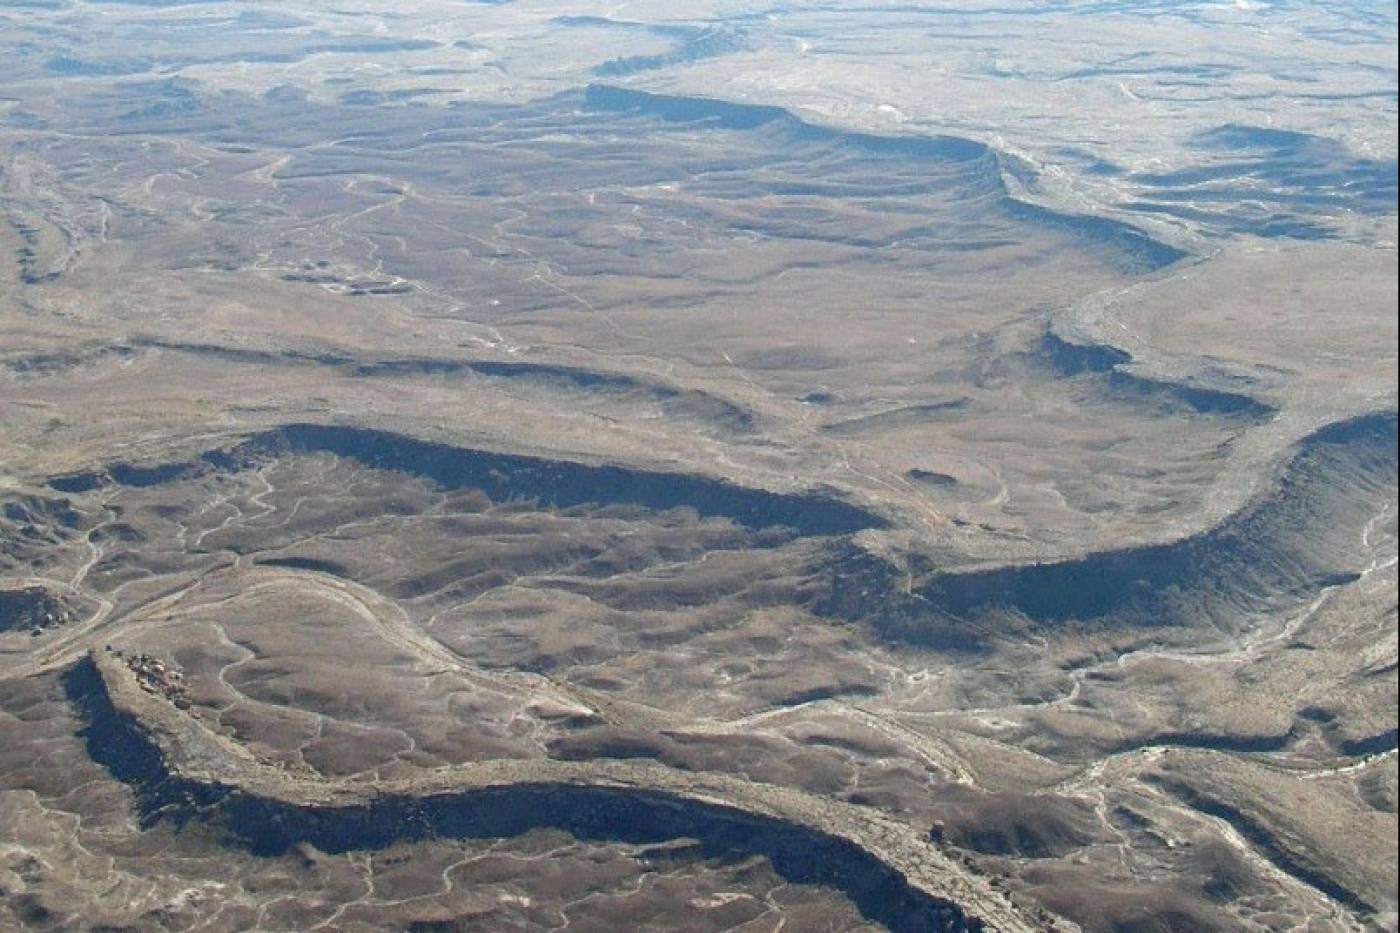 Inverted channels on Earth